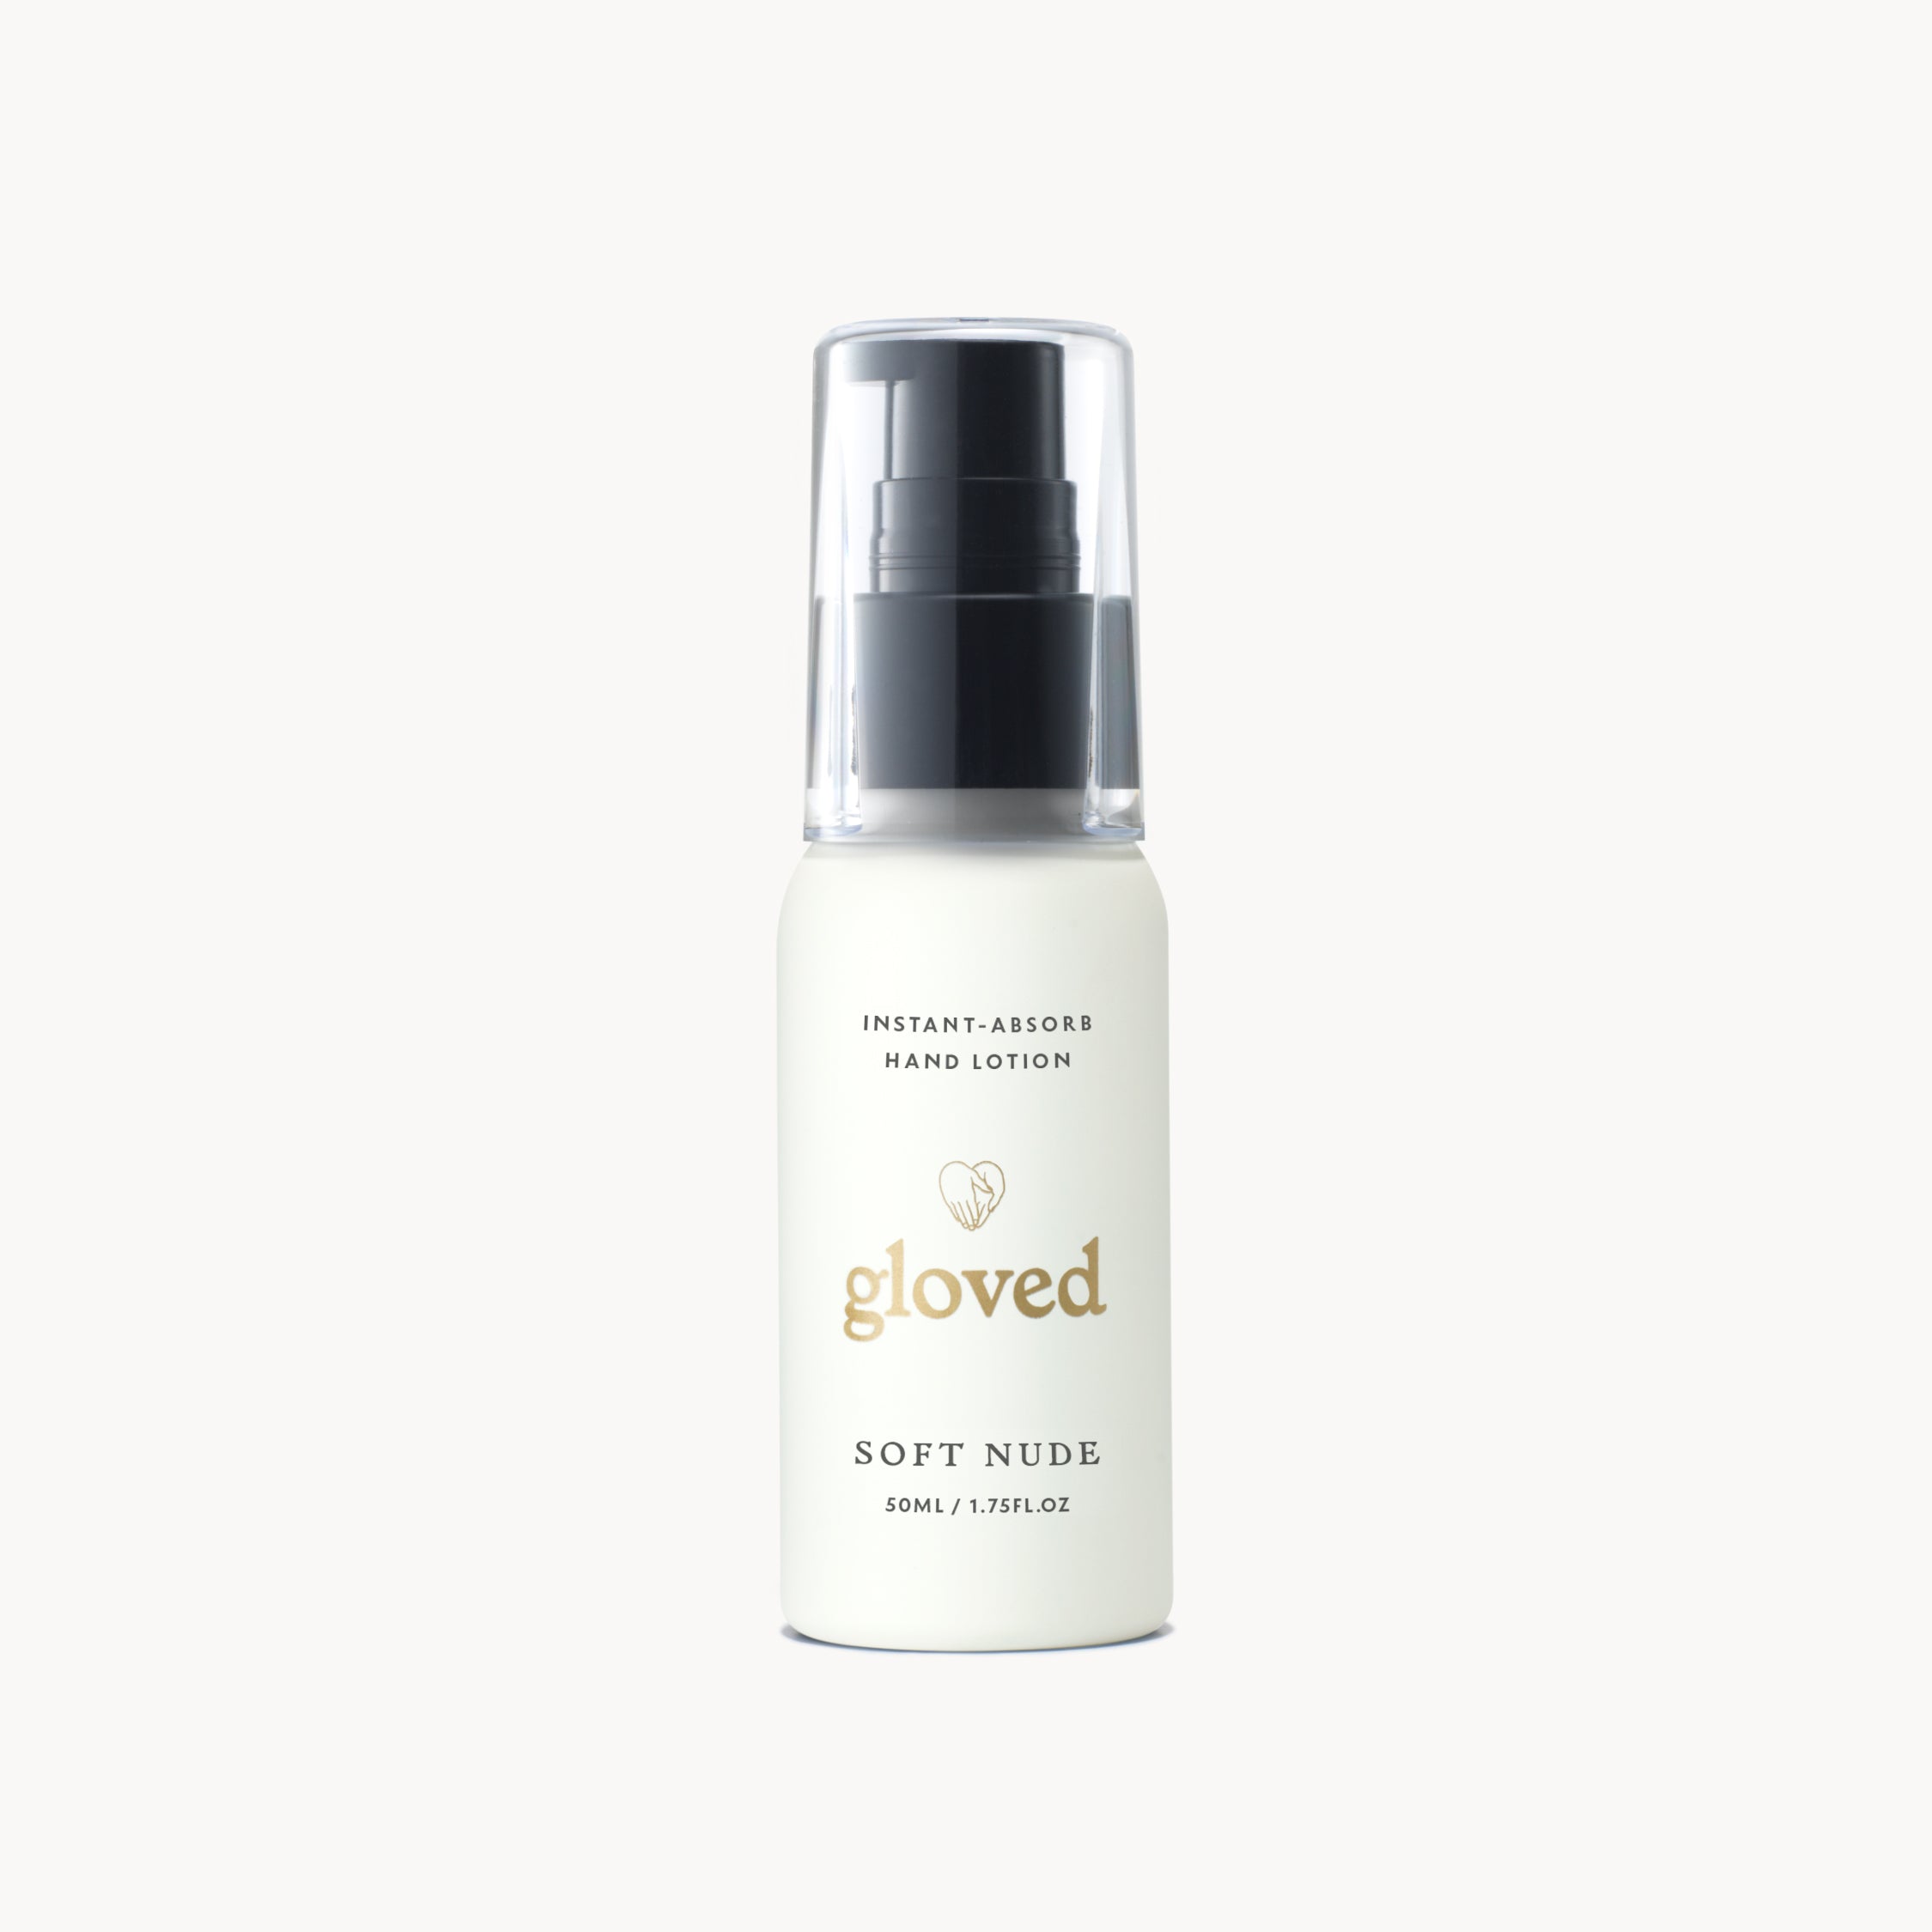 Soft Nude Instant-Absorb Hand Lotion